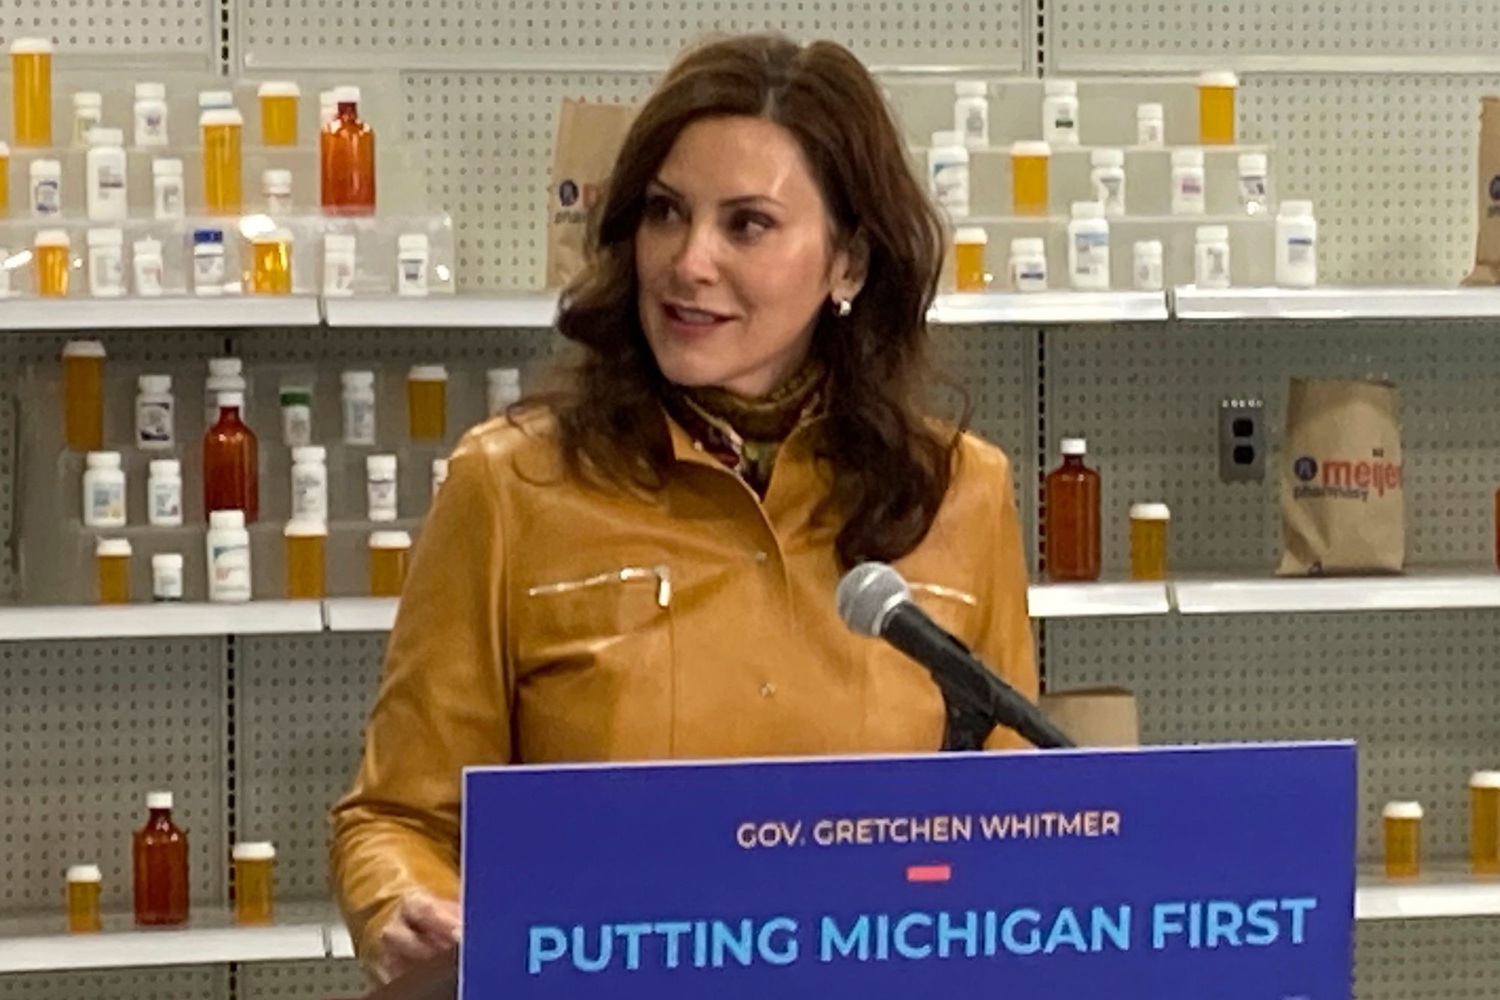 Whitmer Discusses Overcoming Partisan Obstruction to Create Jobs, Lower Rx Drug Costs for Michigan Families